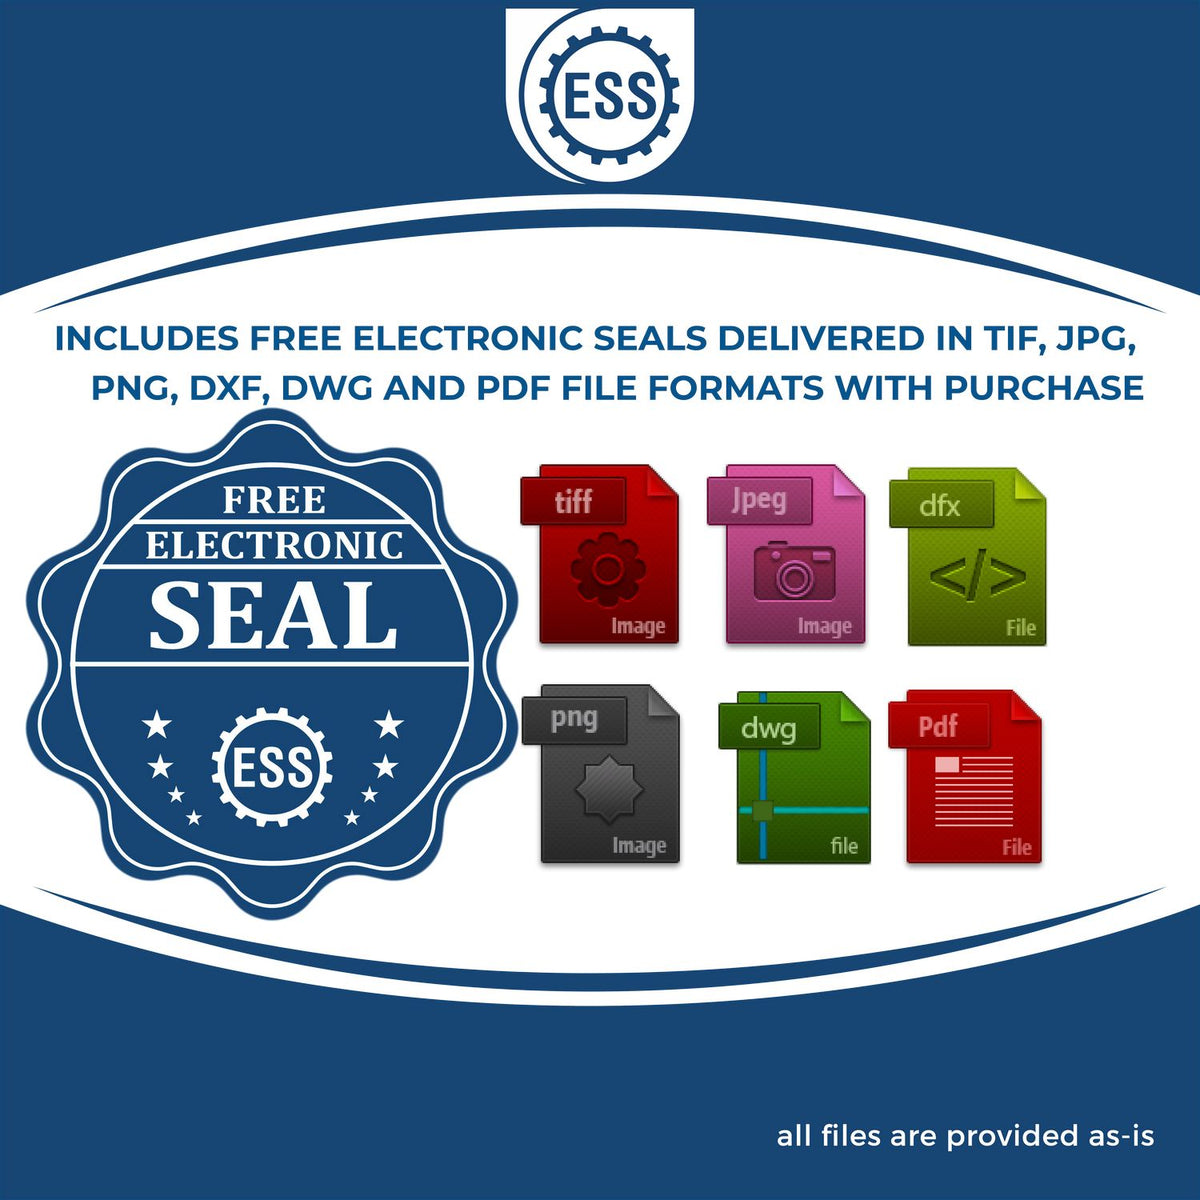 An infographic for the free electronic seal for the Handheld Florida Land Surveyor Seal illustrating the different file type icons such as DXF, DWG, TIF, JPG and PNG.